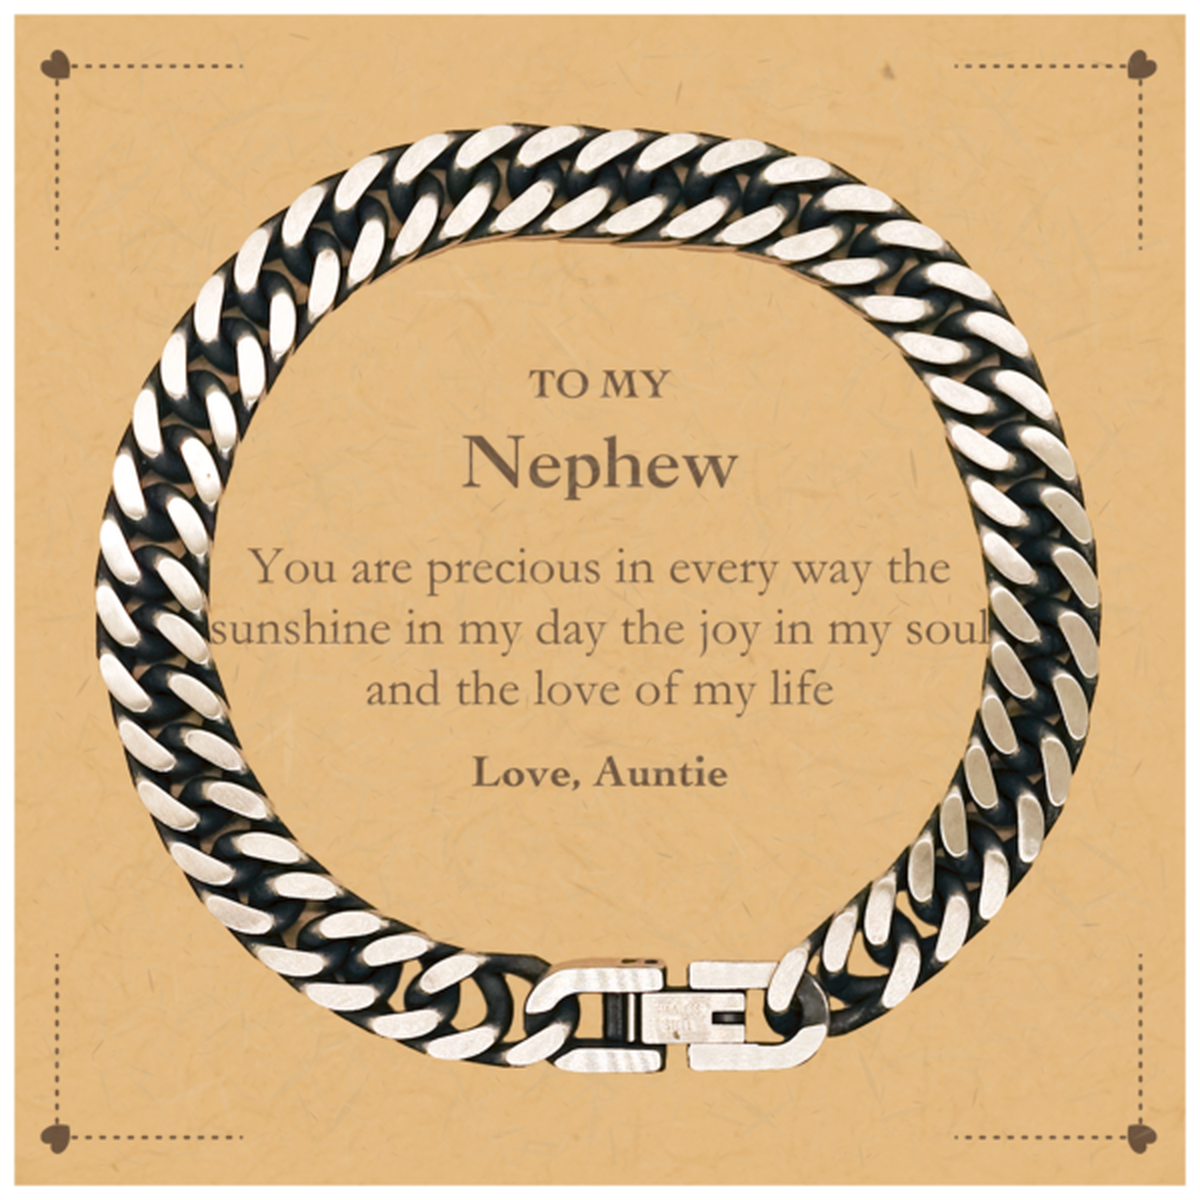 Graduation Gifts for Nephew Cuban Link Chain Bracelet Present from Auntie, Christmas Nephew Birthday Gifts Nephew You are precious in every way the sunshine in my day. Love, Auntie